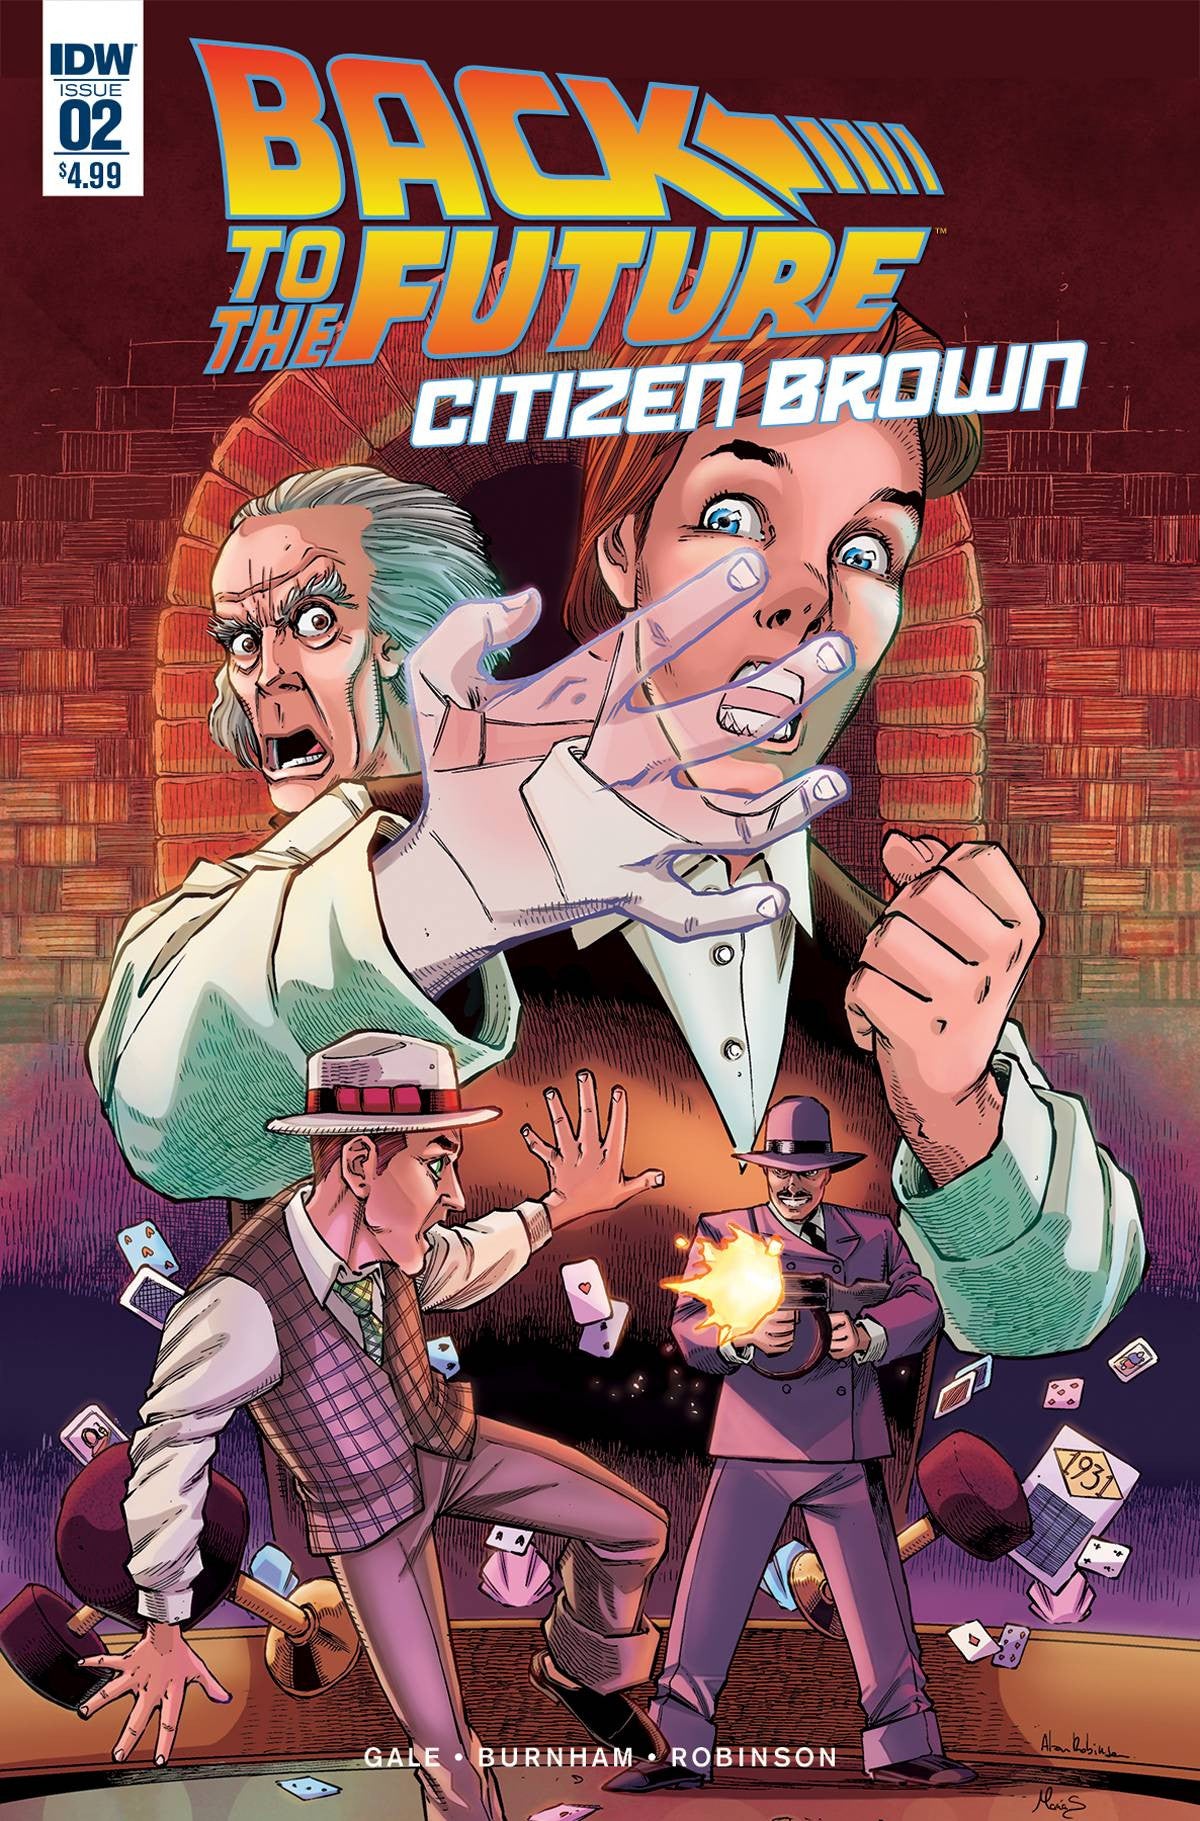 BACK TO THE FUTURE CITIZEN BROWN #2 (OF 5) COVER